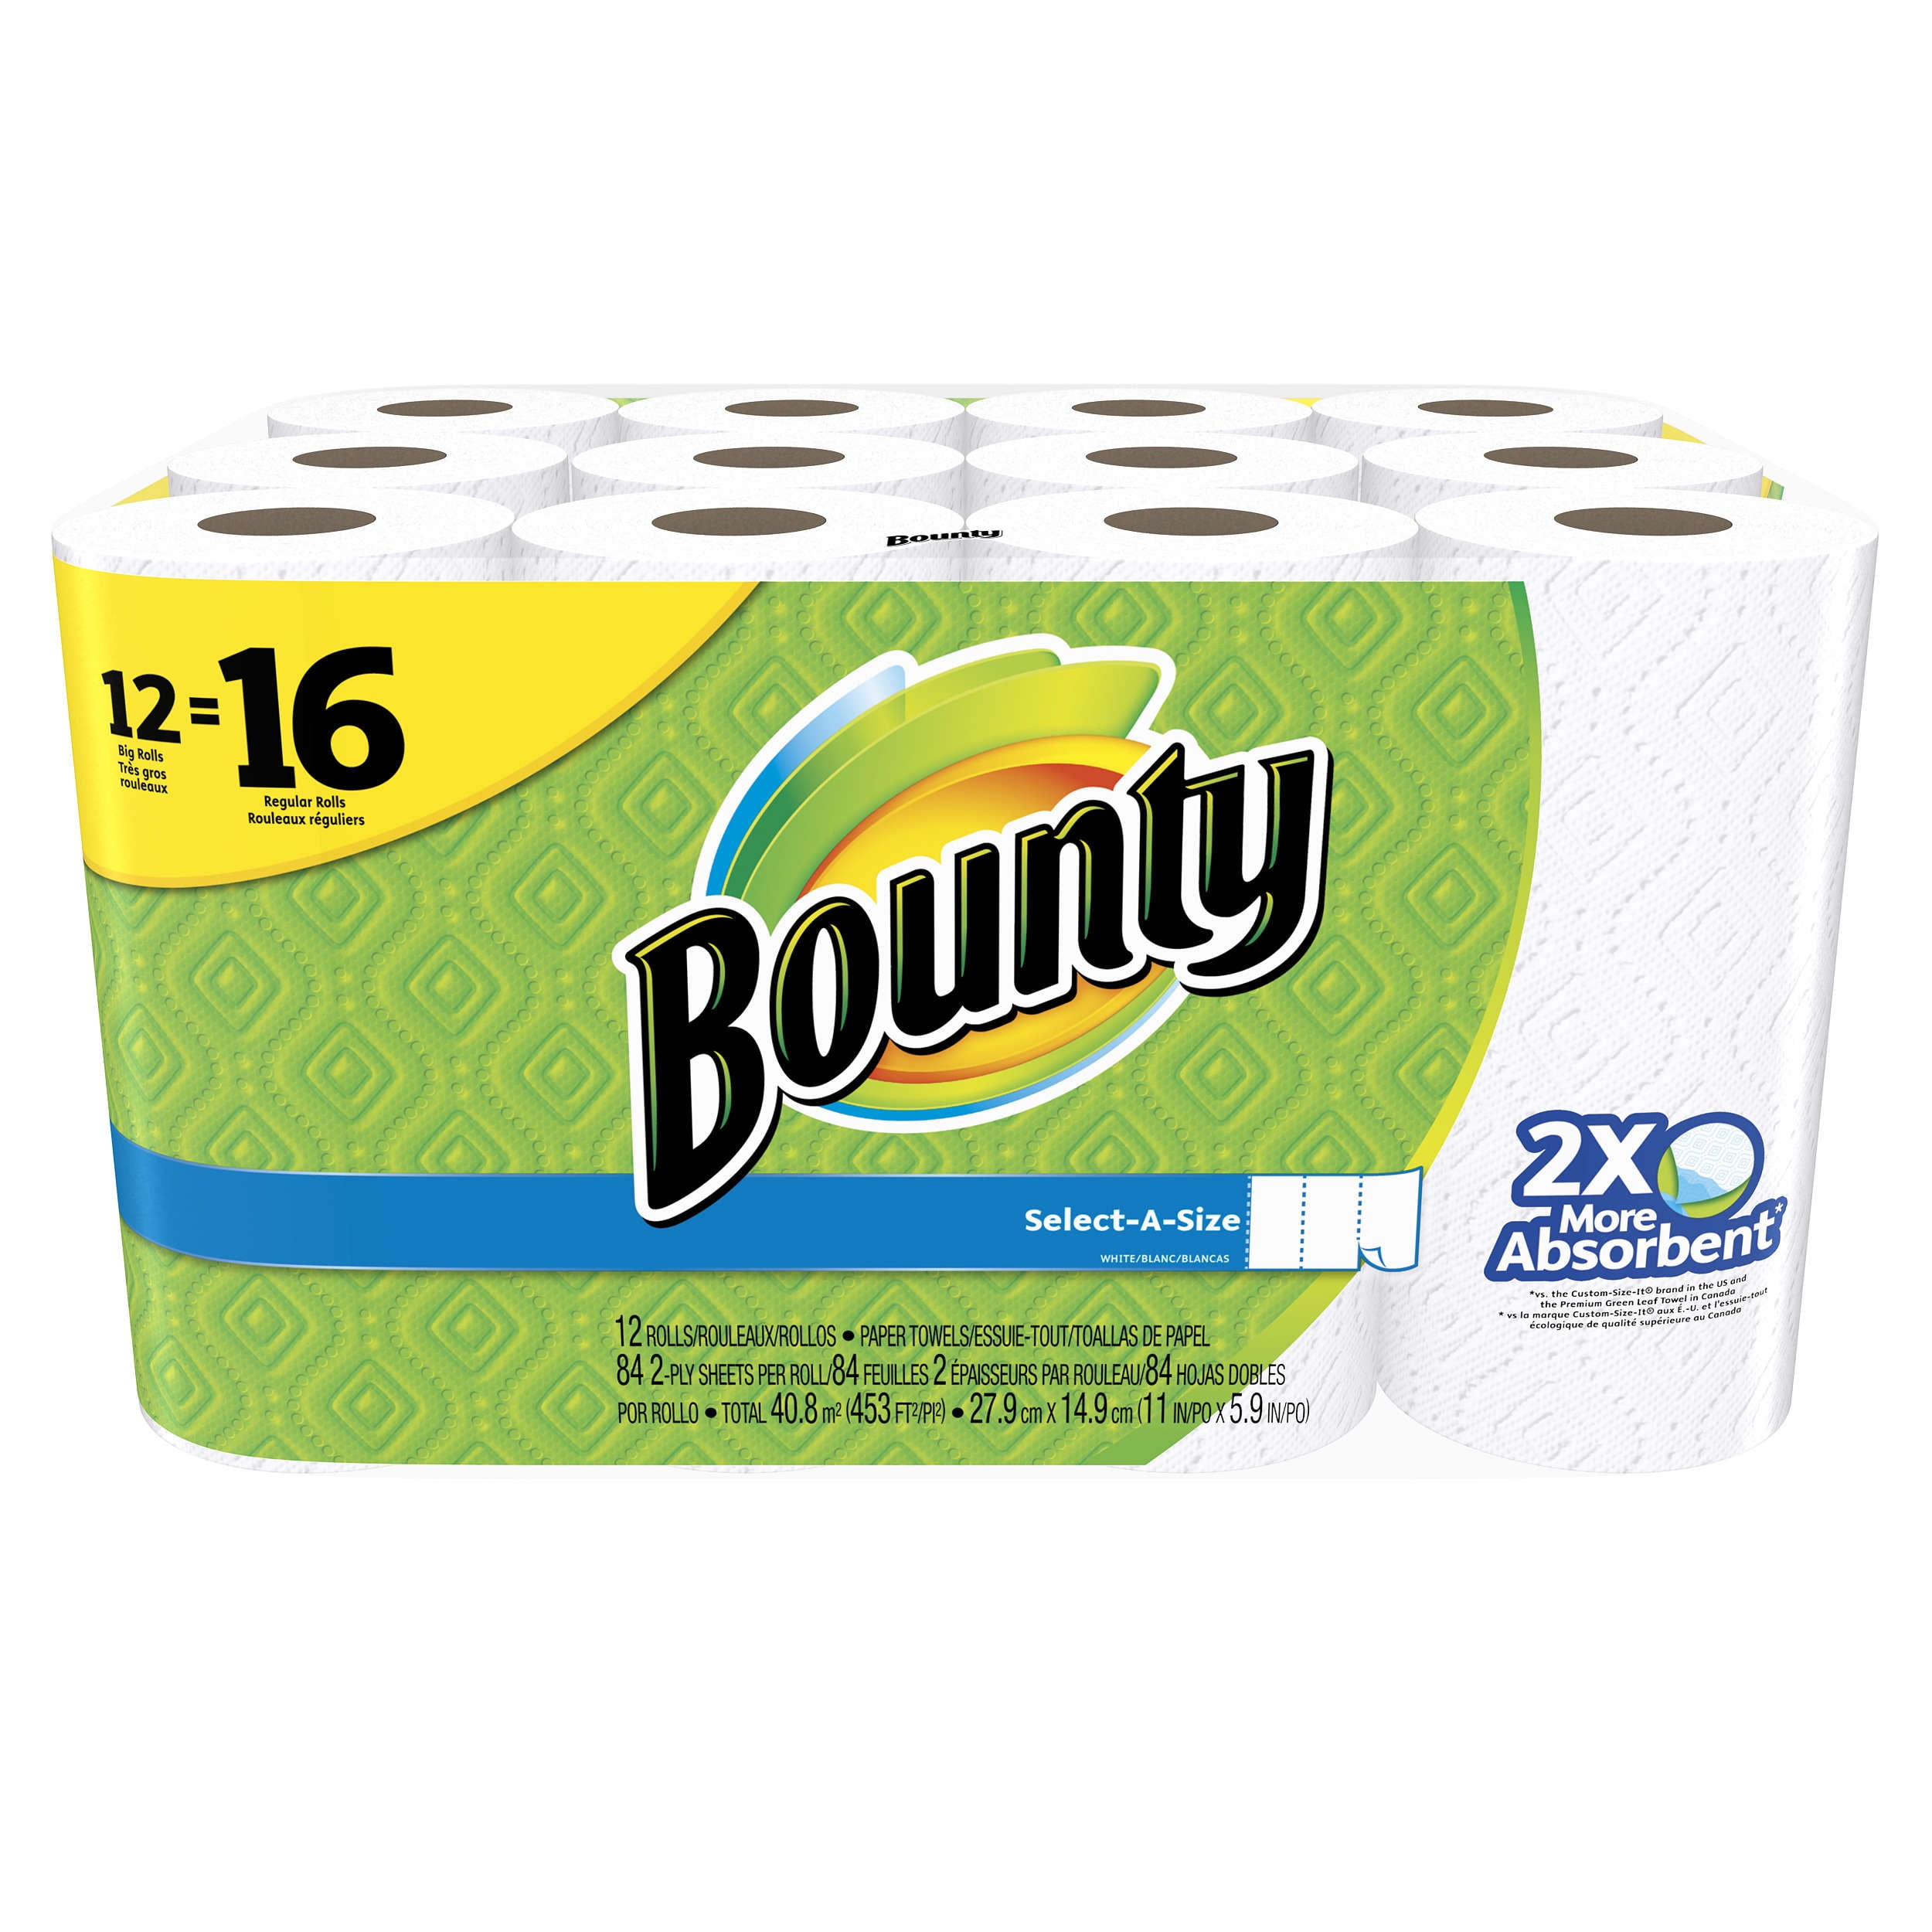 30 Rolls Bounty Essentials Full-Sheet White Paper Towels 2-Ply Fast Shipping 